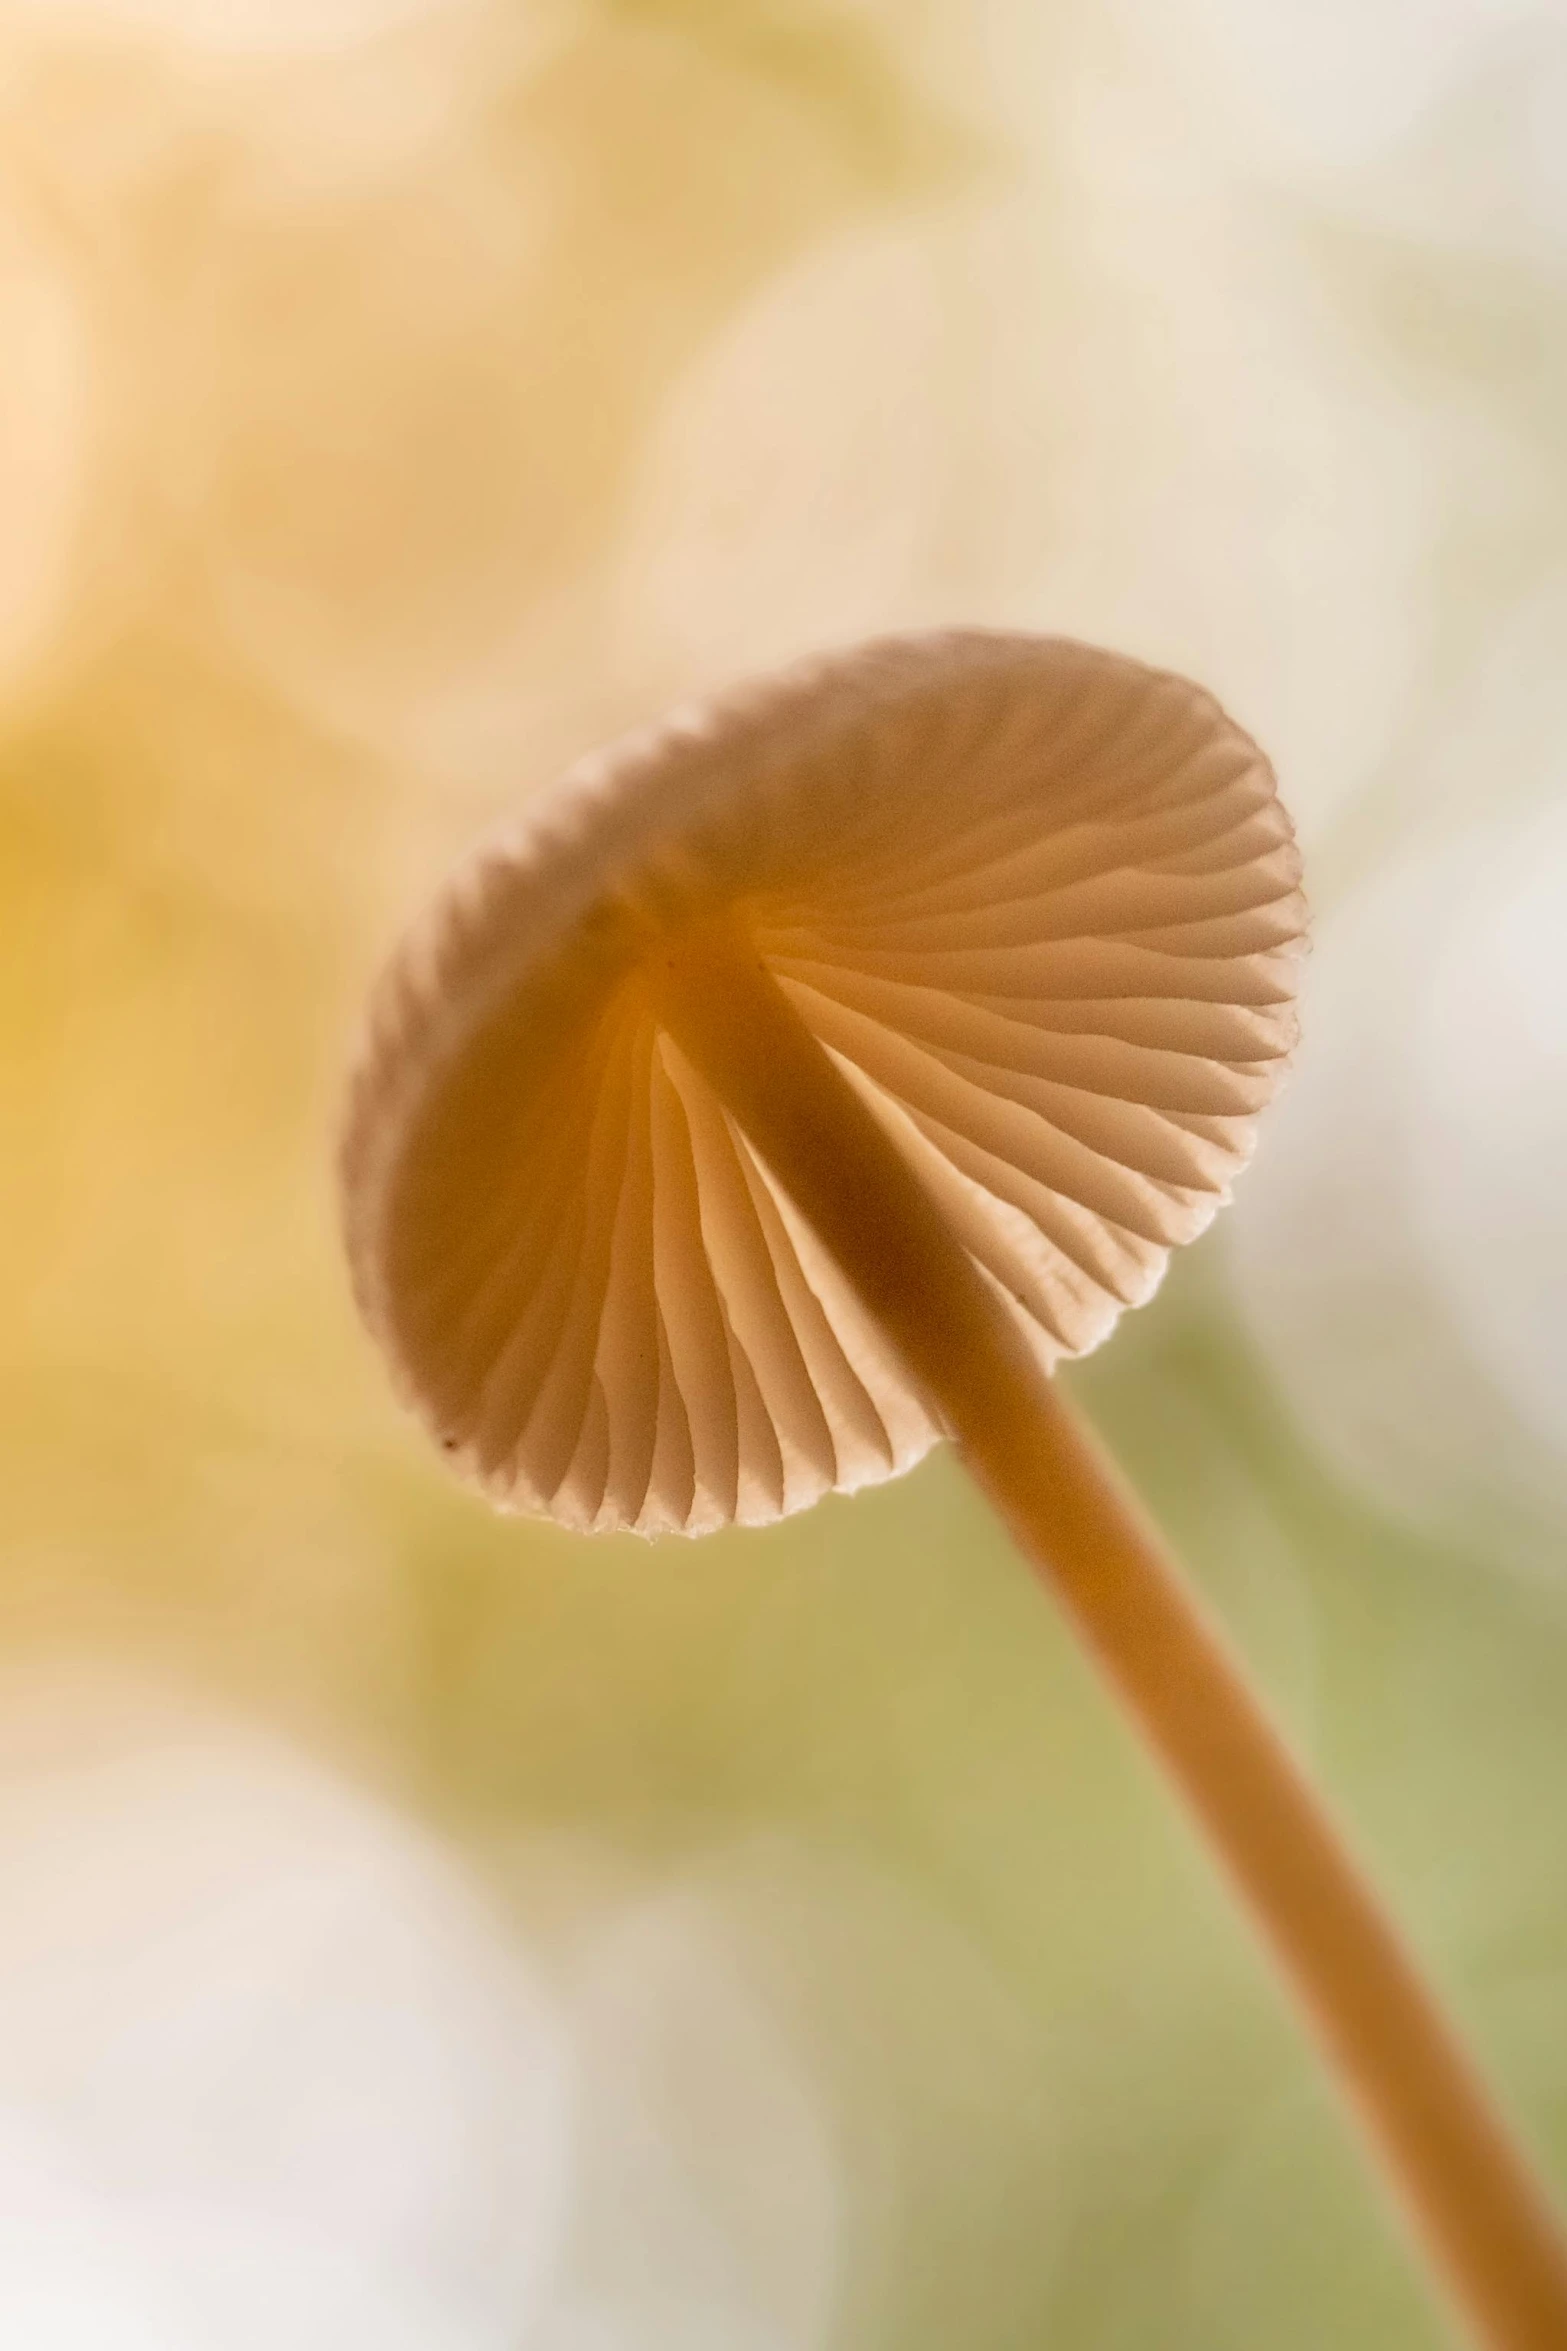 a mushroom that has long stem has very thin, pale - colored caps